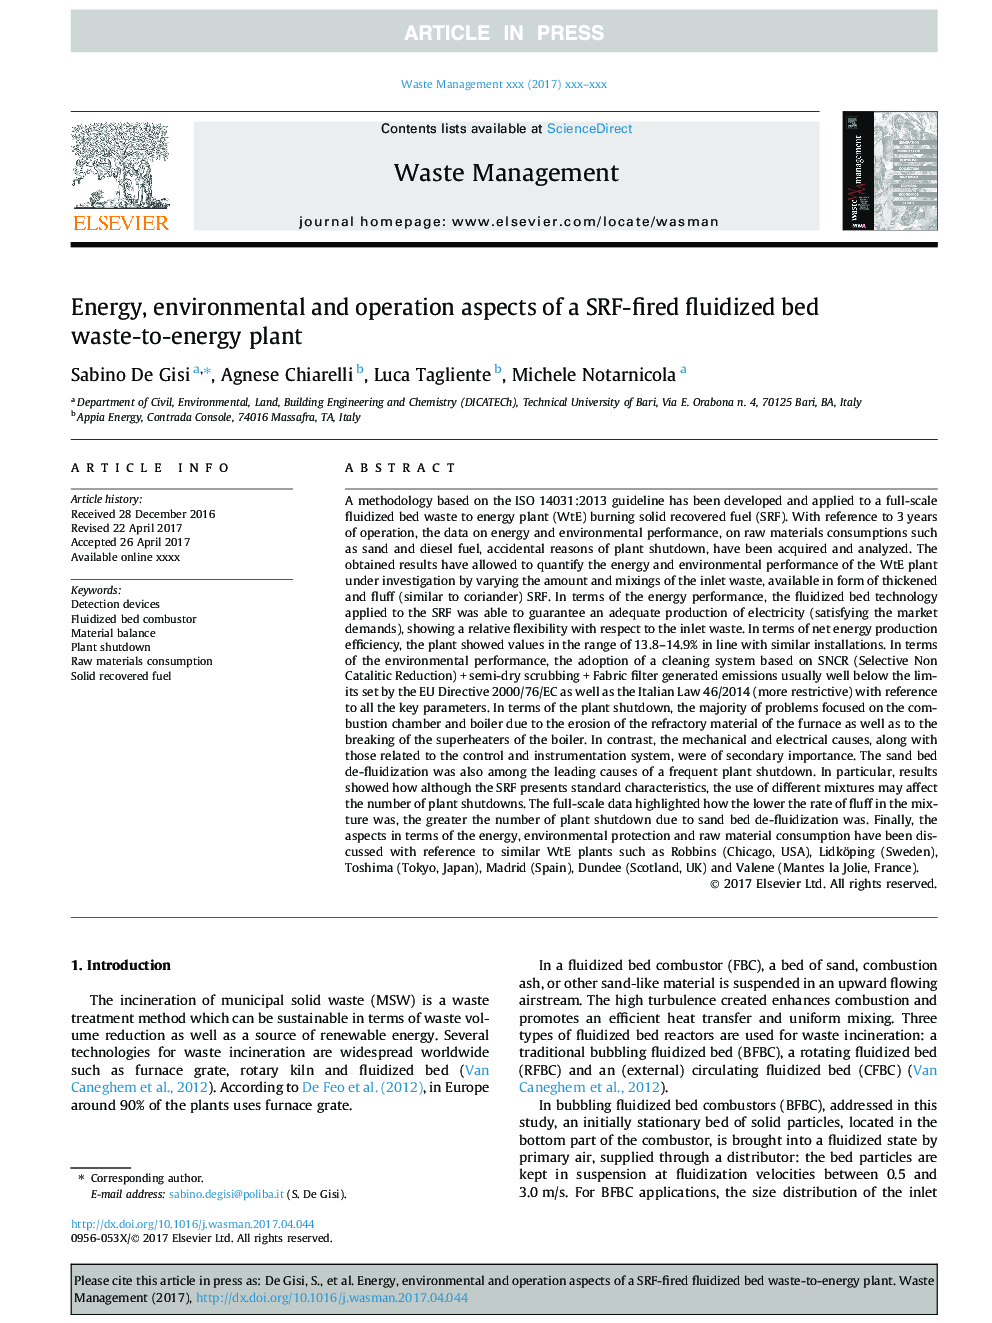 Energy, environmental and operation aspects of a SRF-fired fluidized bed waste-to-energy plant